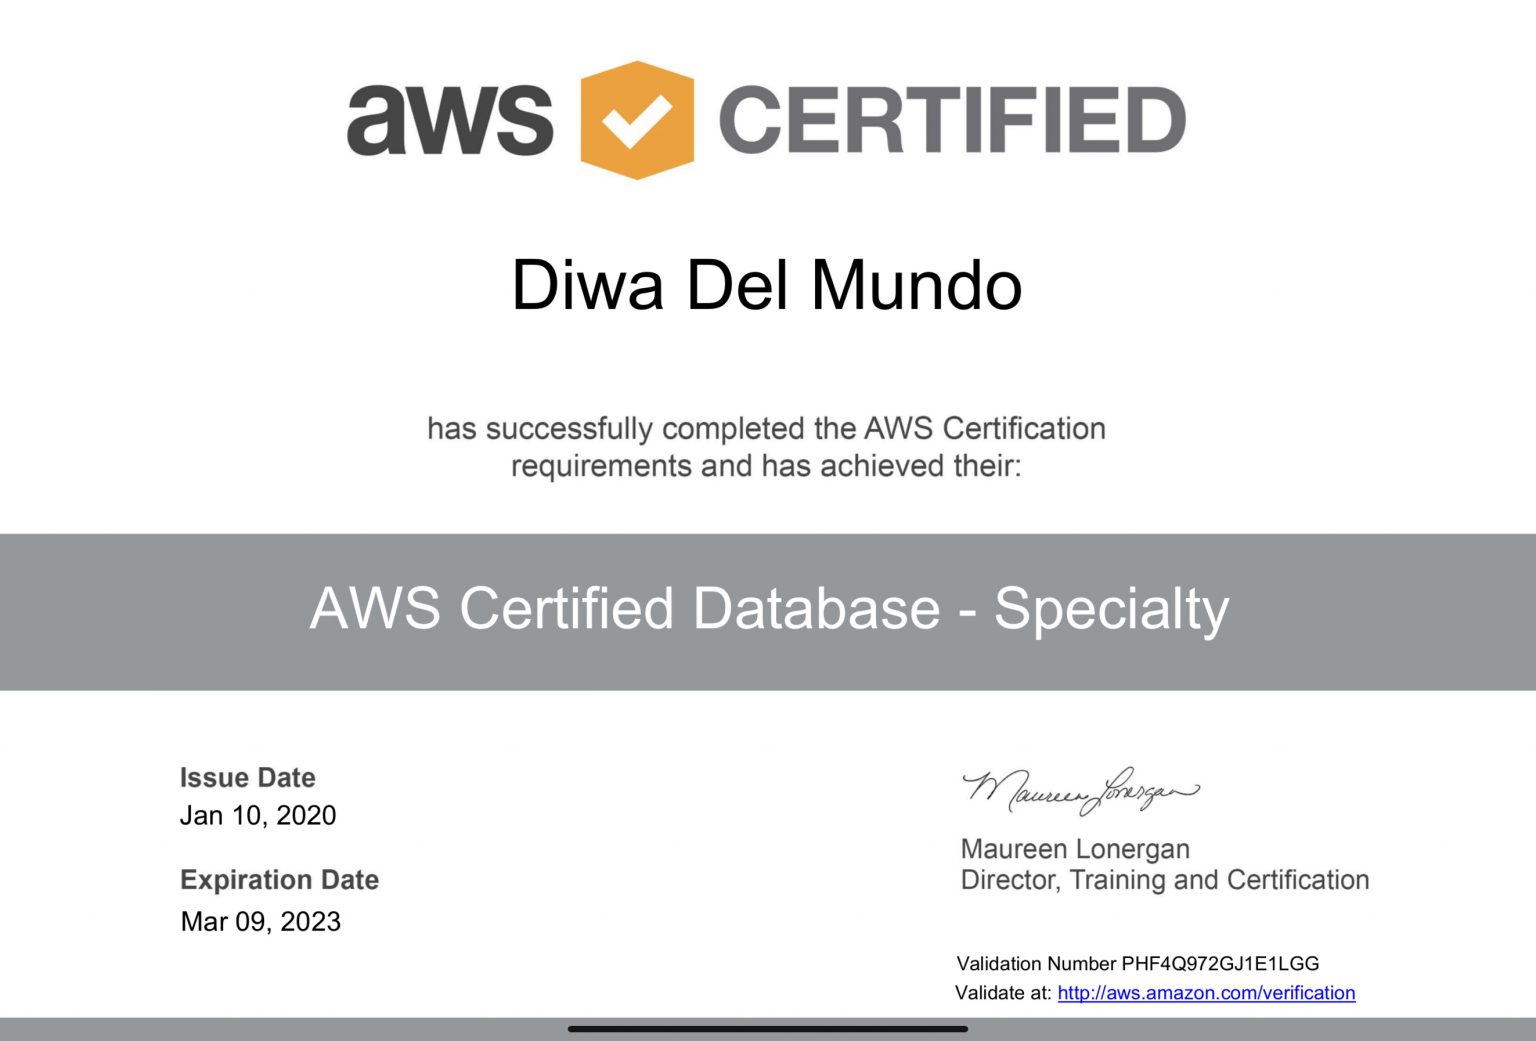 AWS Certified Database - Specialty credential awarded to Diwa del Mundo